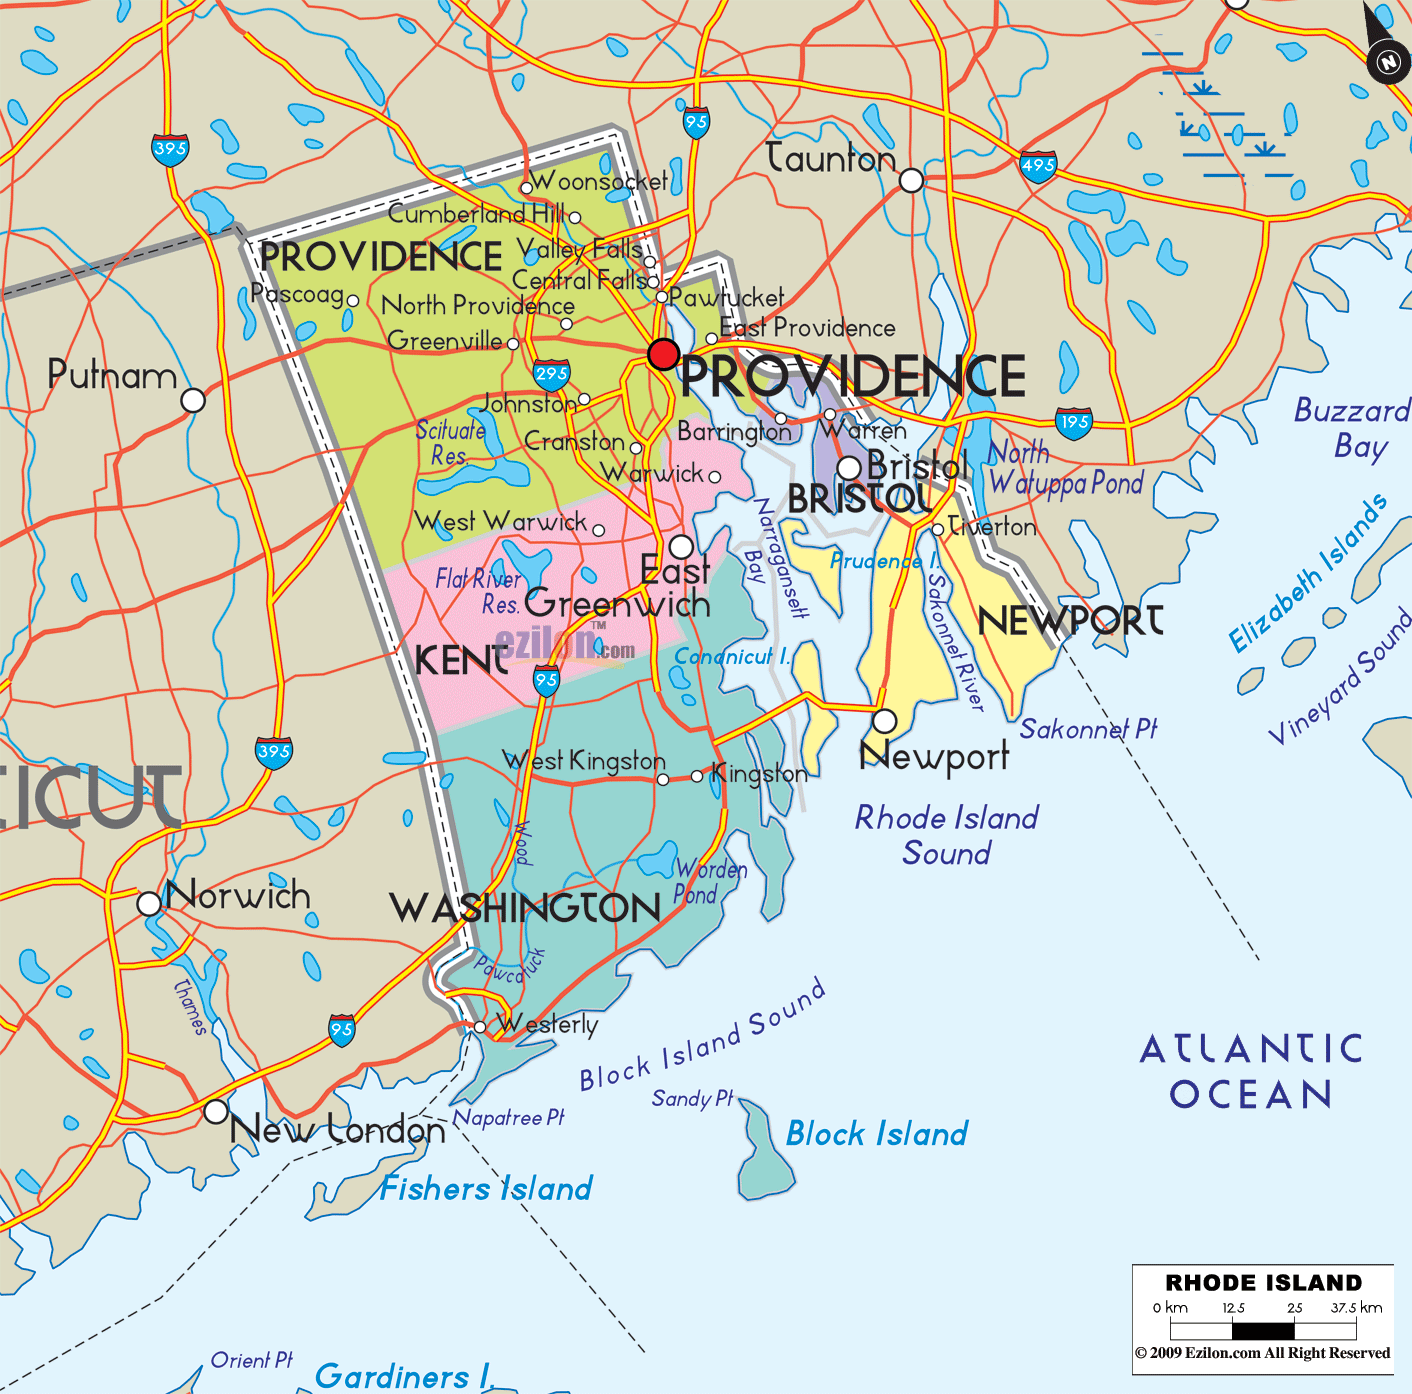 Rhode Island county map with county name